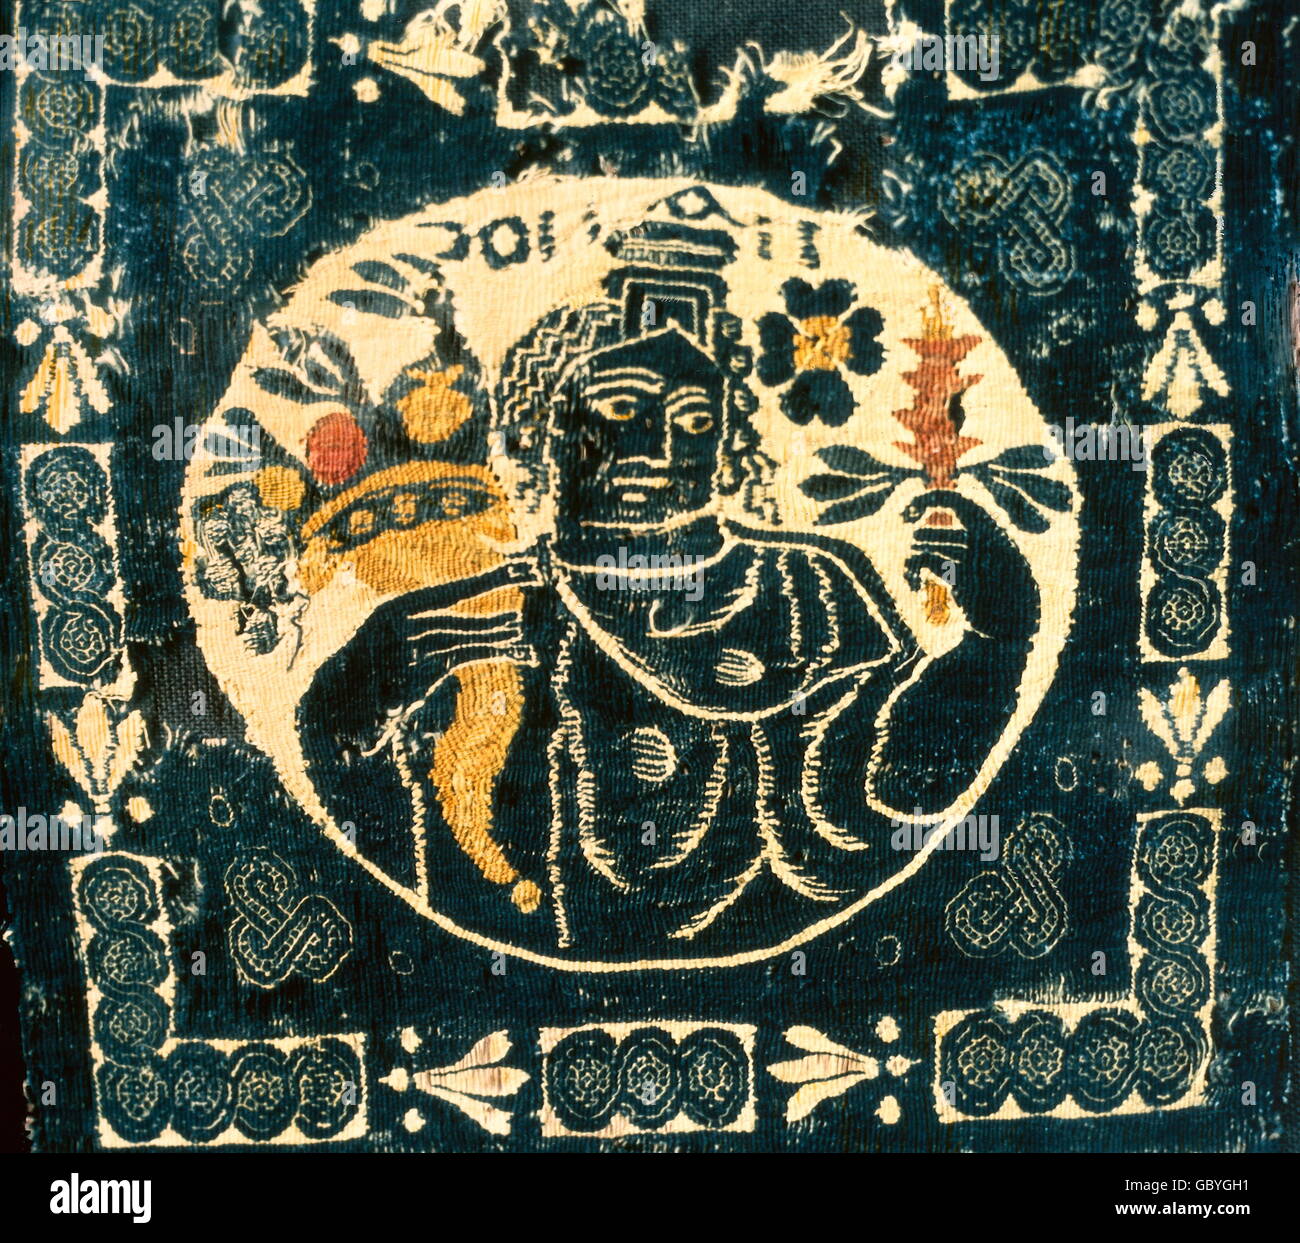 fine arts, Middle Ages, Byzantine Empire, goddess flora, textiles fragment, 4th / 5th century, Victoria & Albert Museum London, Stock Photo